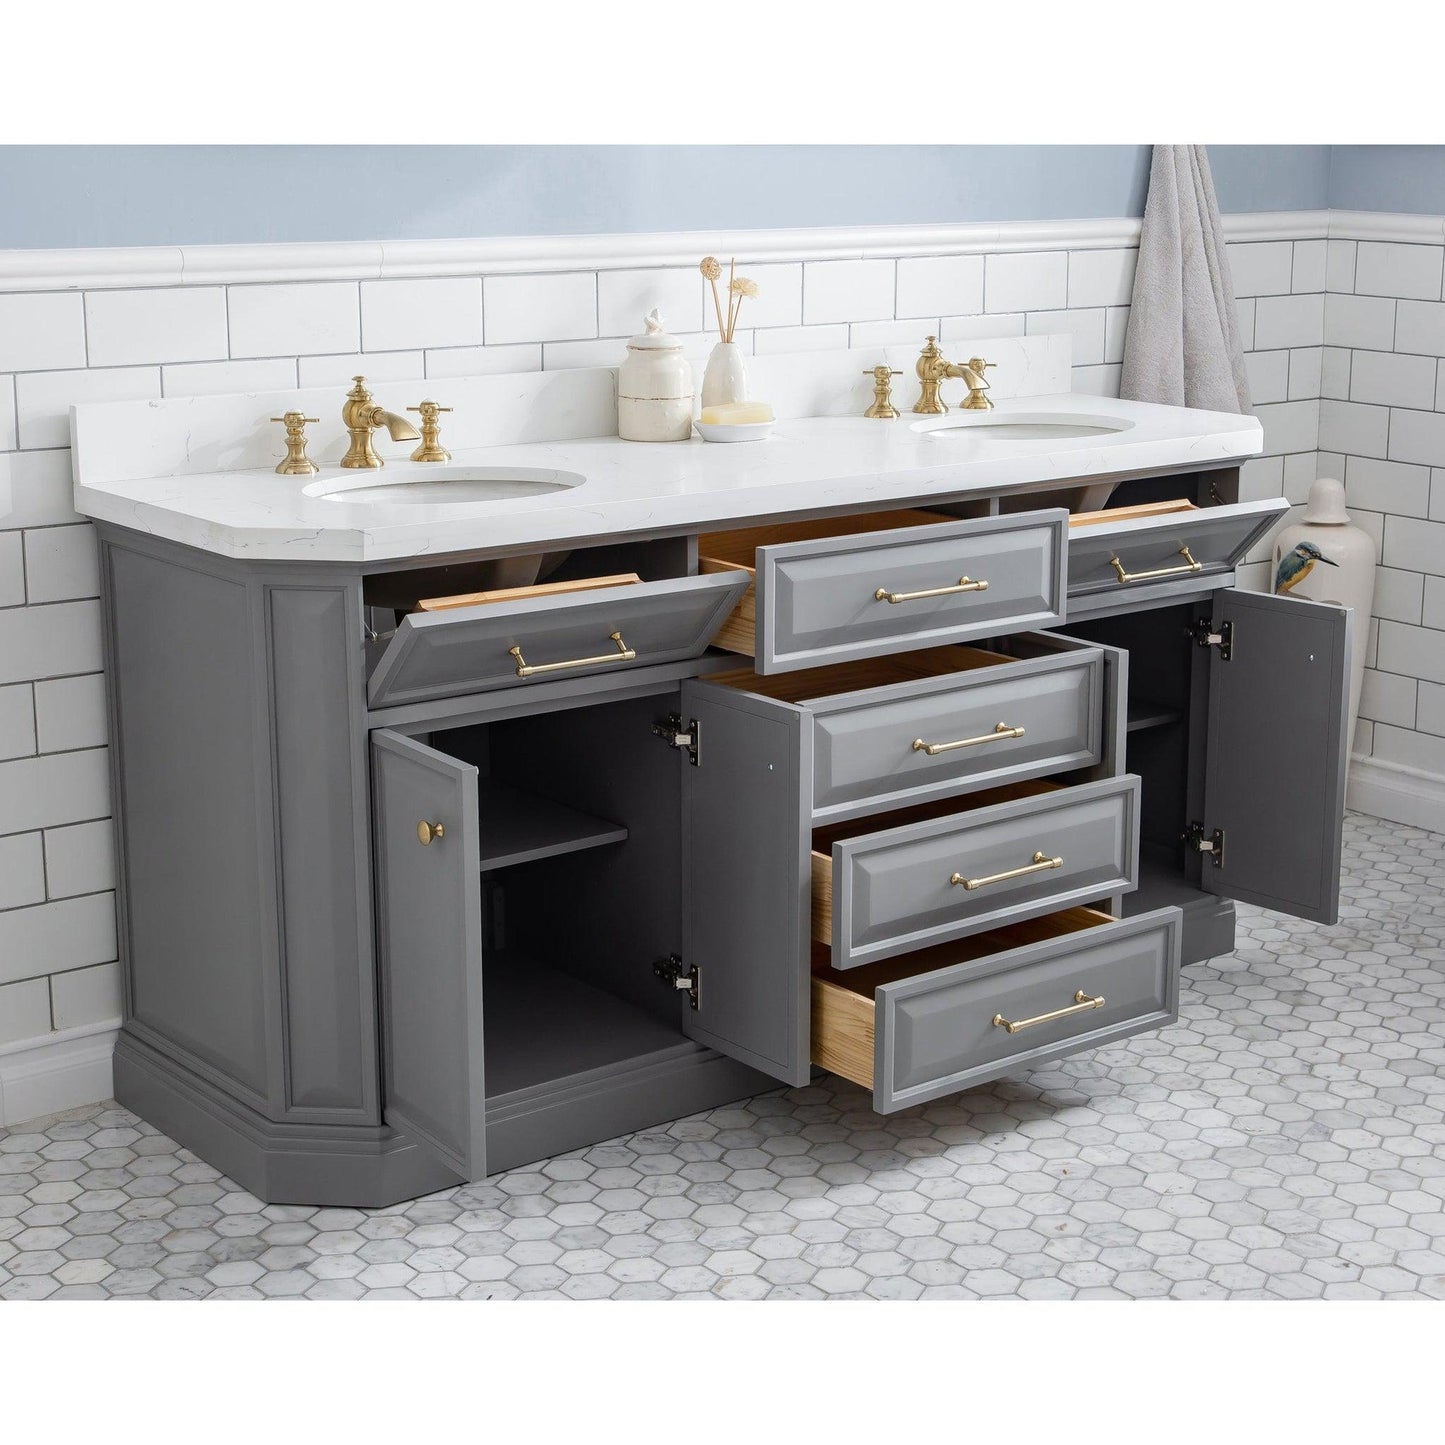 Water Creation Palace 72" Quartz Carrara Cashmere Grey Bathroom Vanity Set With Hardware And F2-0013 Faucets in Satin Gold Finish And Mirrors in Chrome Finish